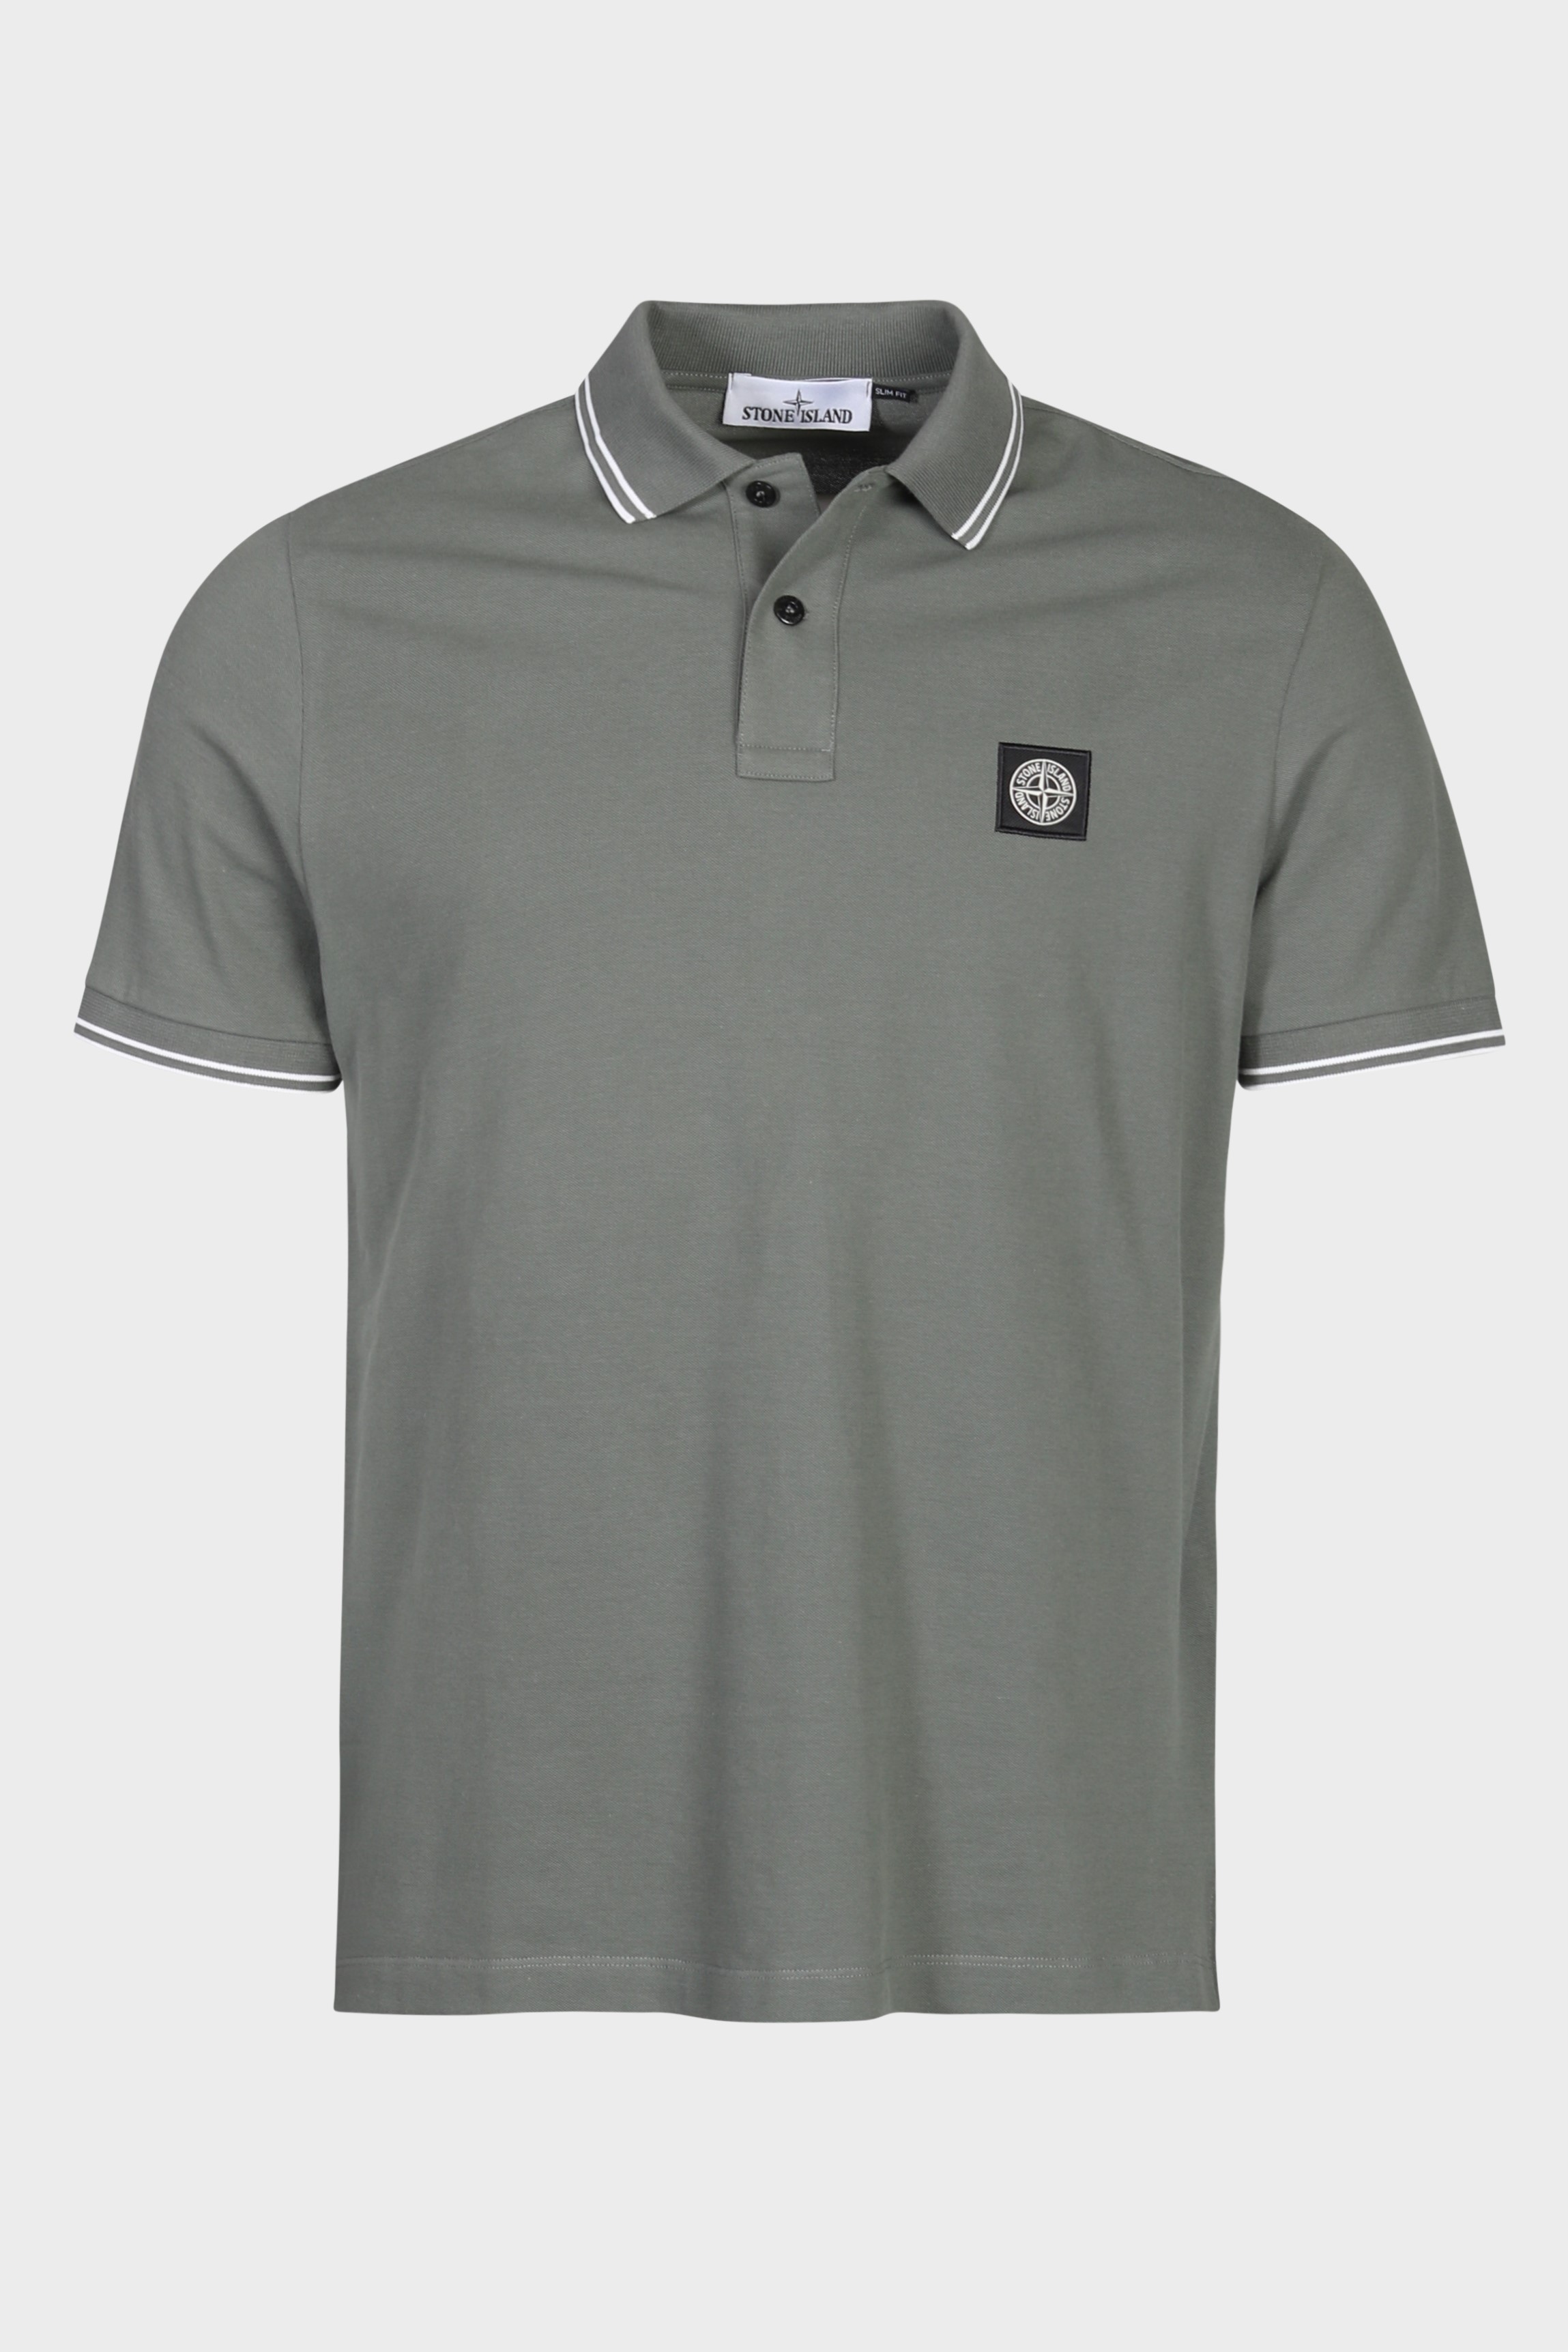 STONE ISLAND Slim Fit Polo Shirt in Green M